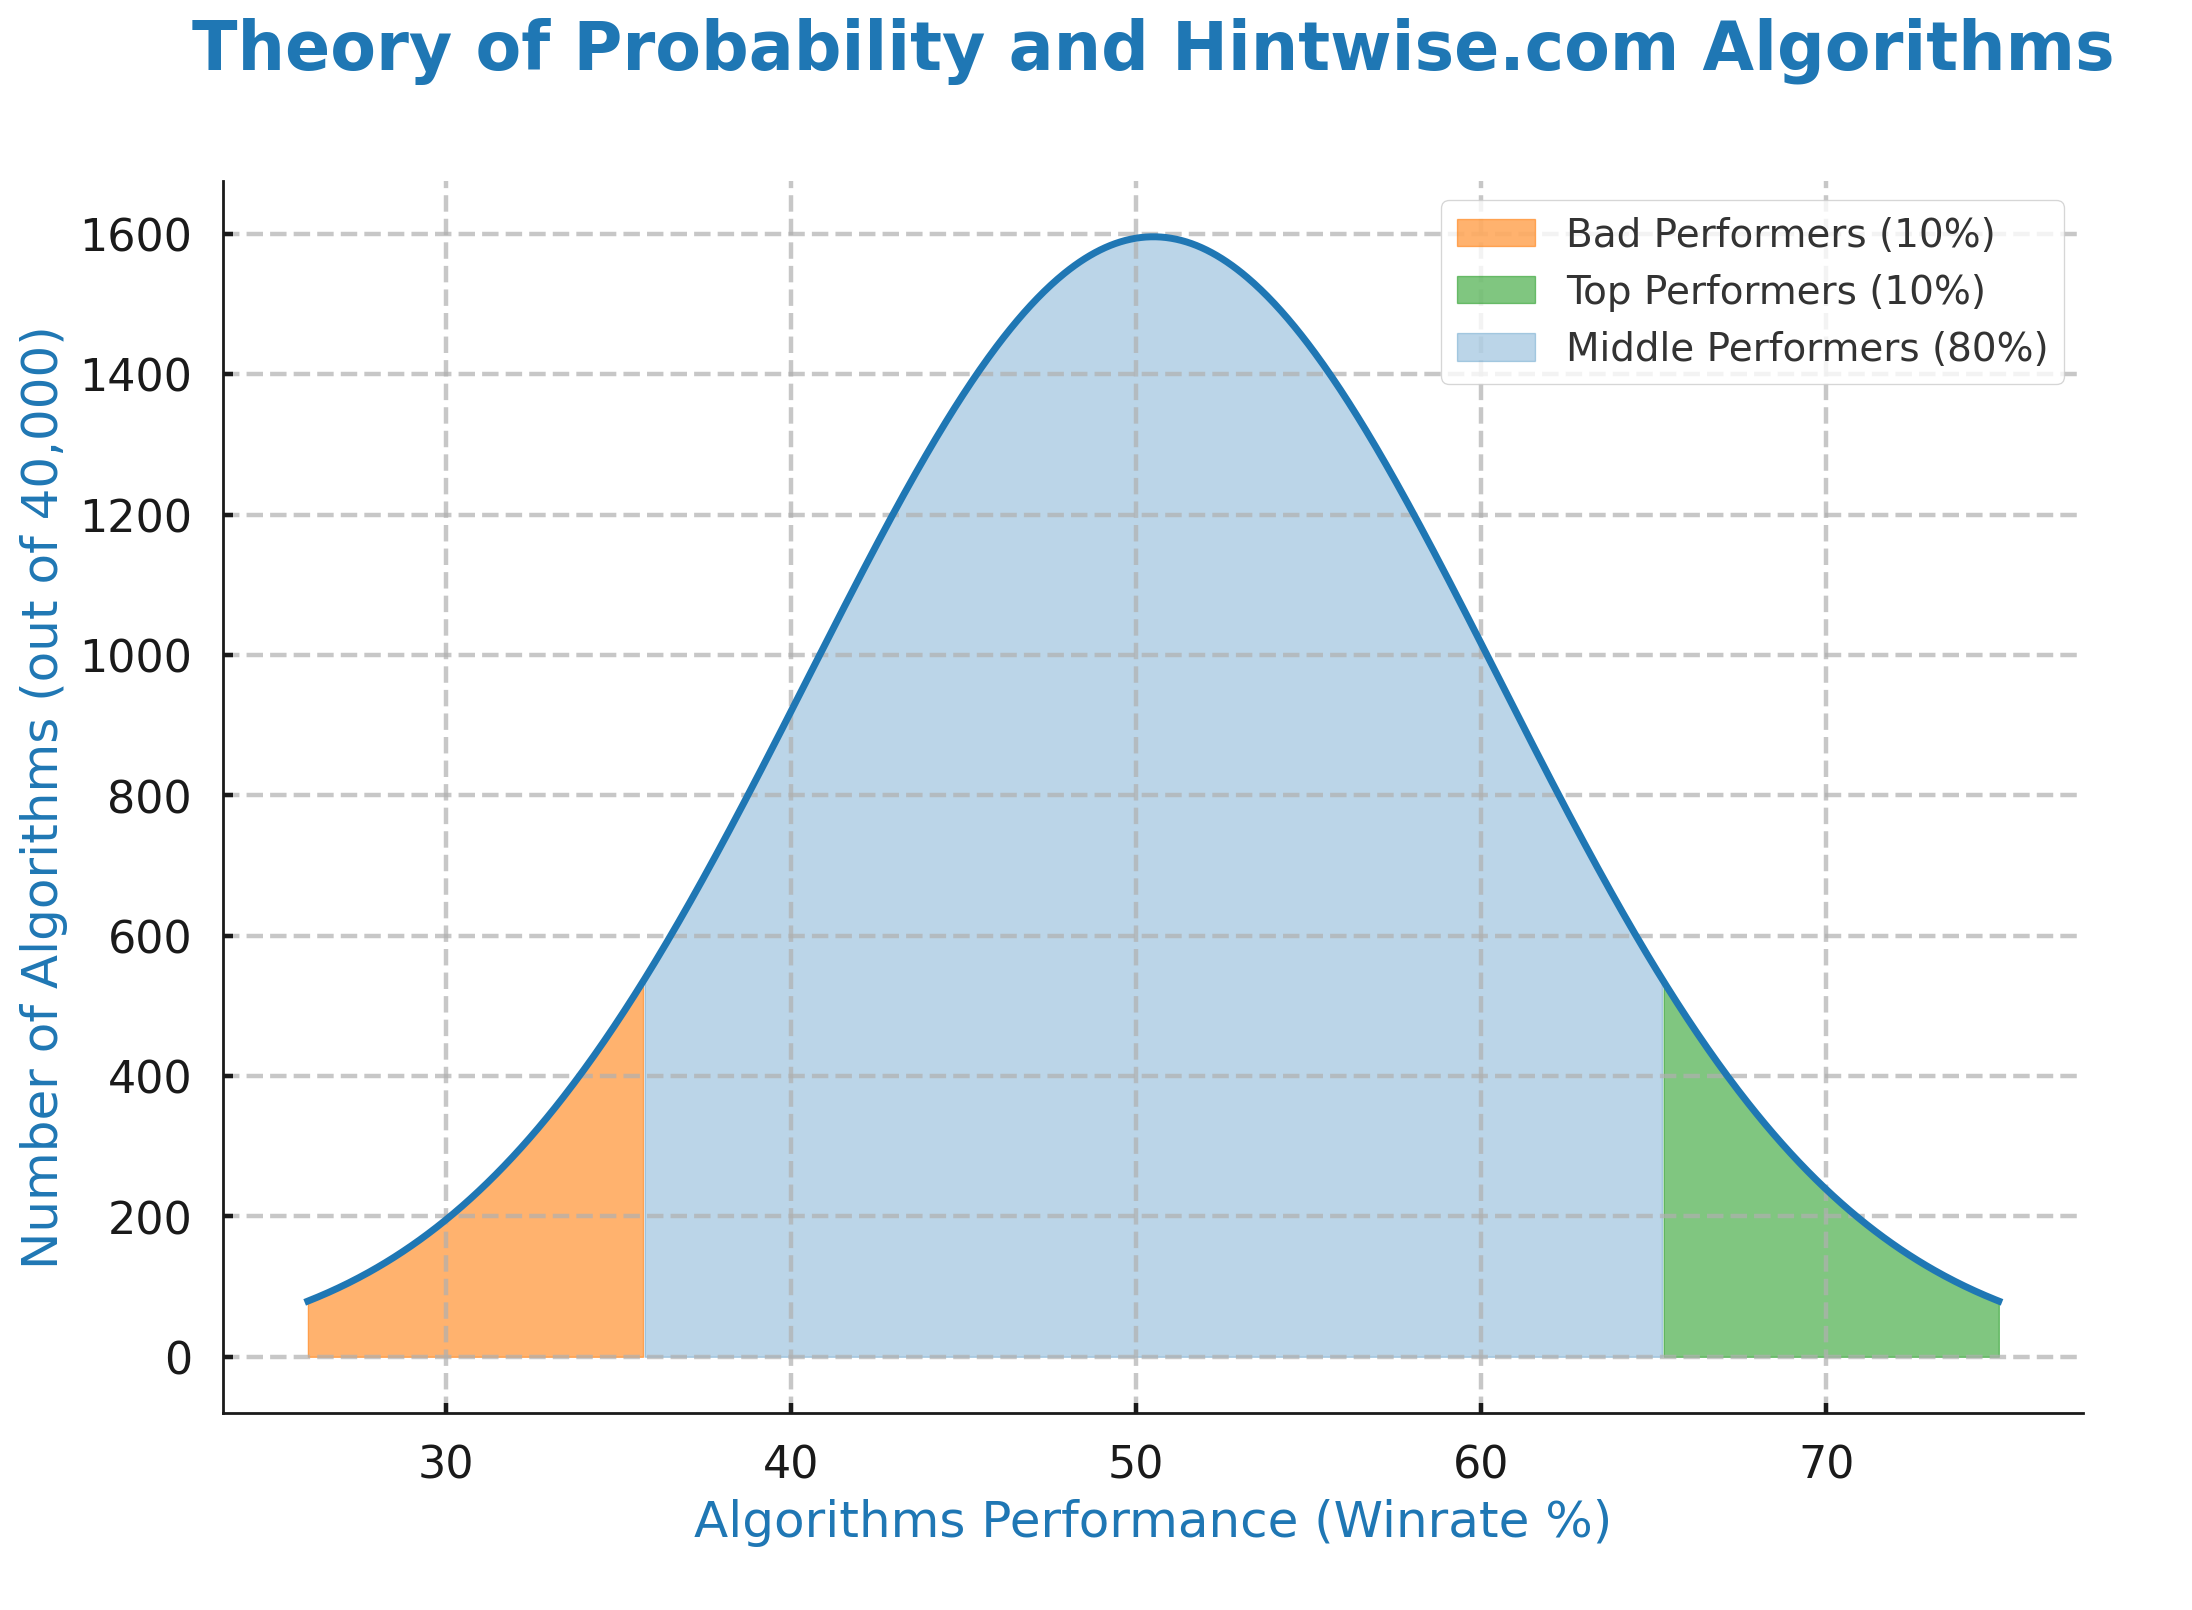 Theory of Probability and Hintwise.com Winning Algorithms